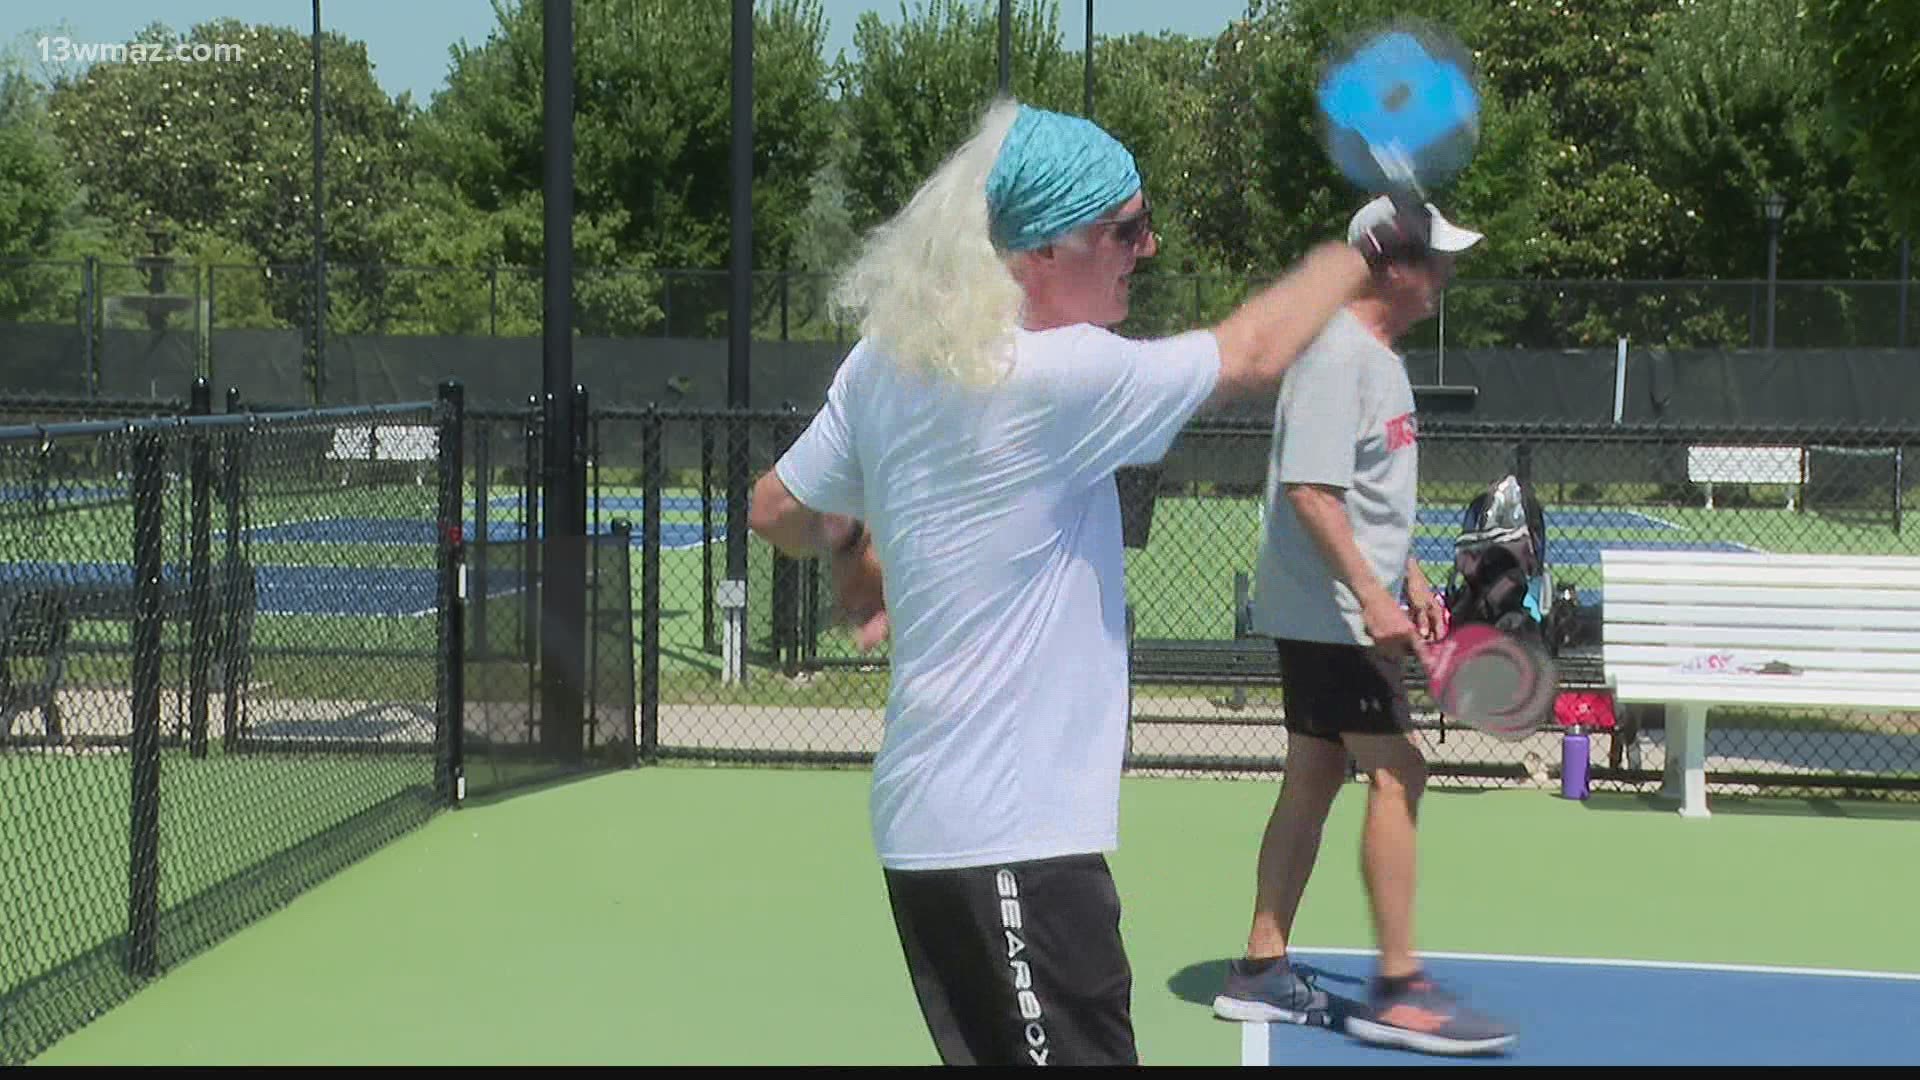 Joe McDaniel and Greg Spicer have been playing pickleball at the Tattnall Square Pickleball & Tennis Center almost every day. Now, they're winning gold medals